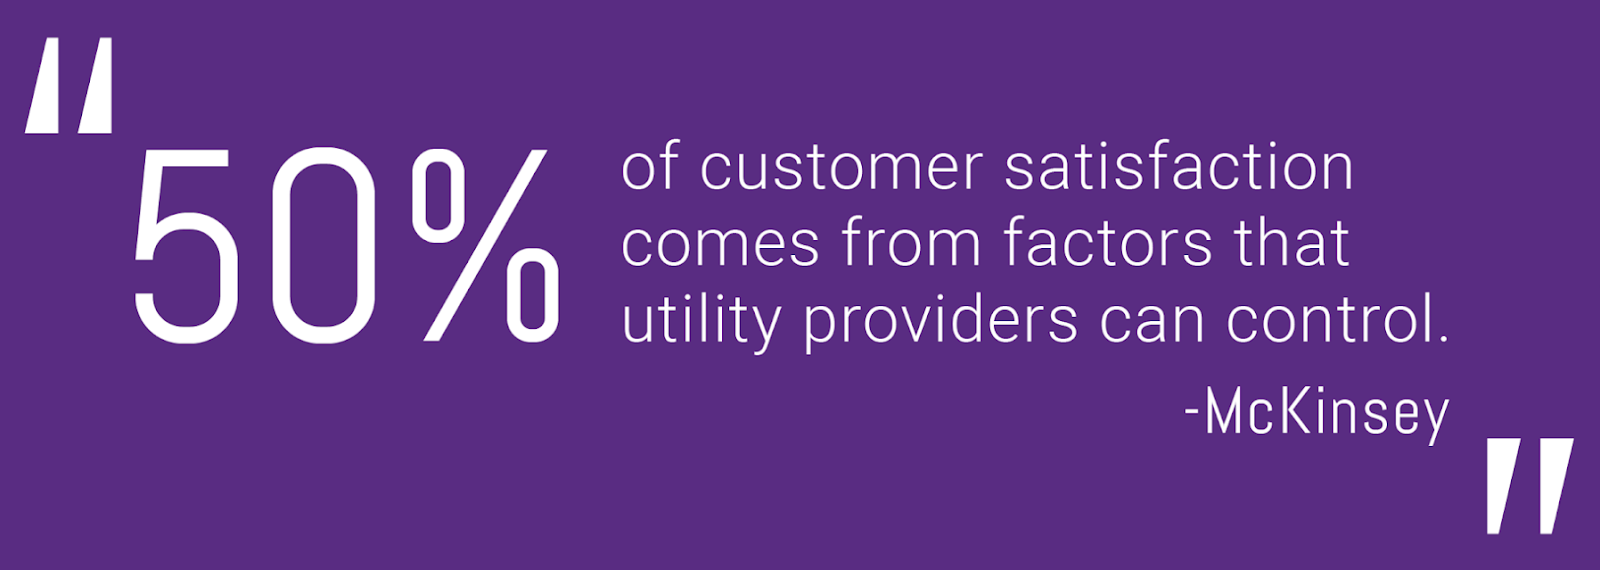 50% of customer satisfactions comes from factors that utility providers can control.